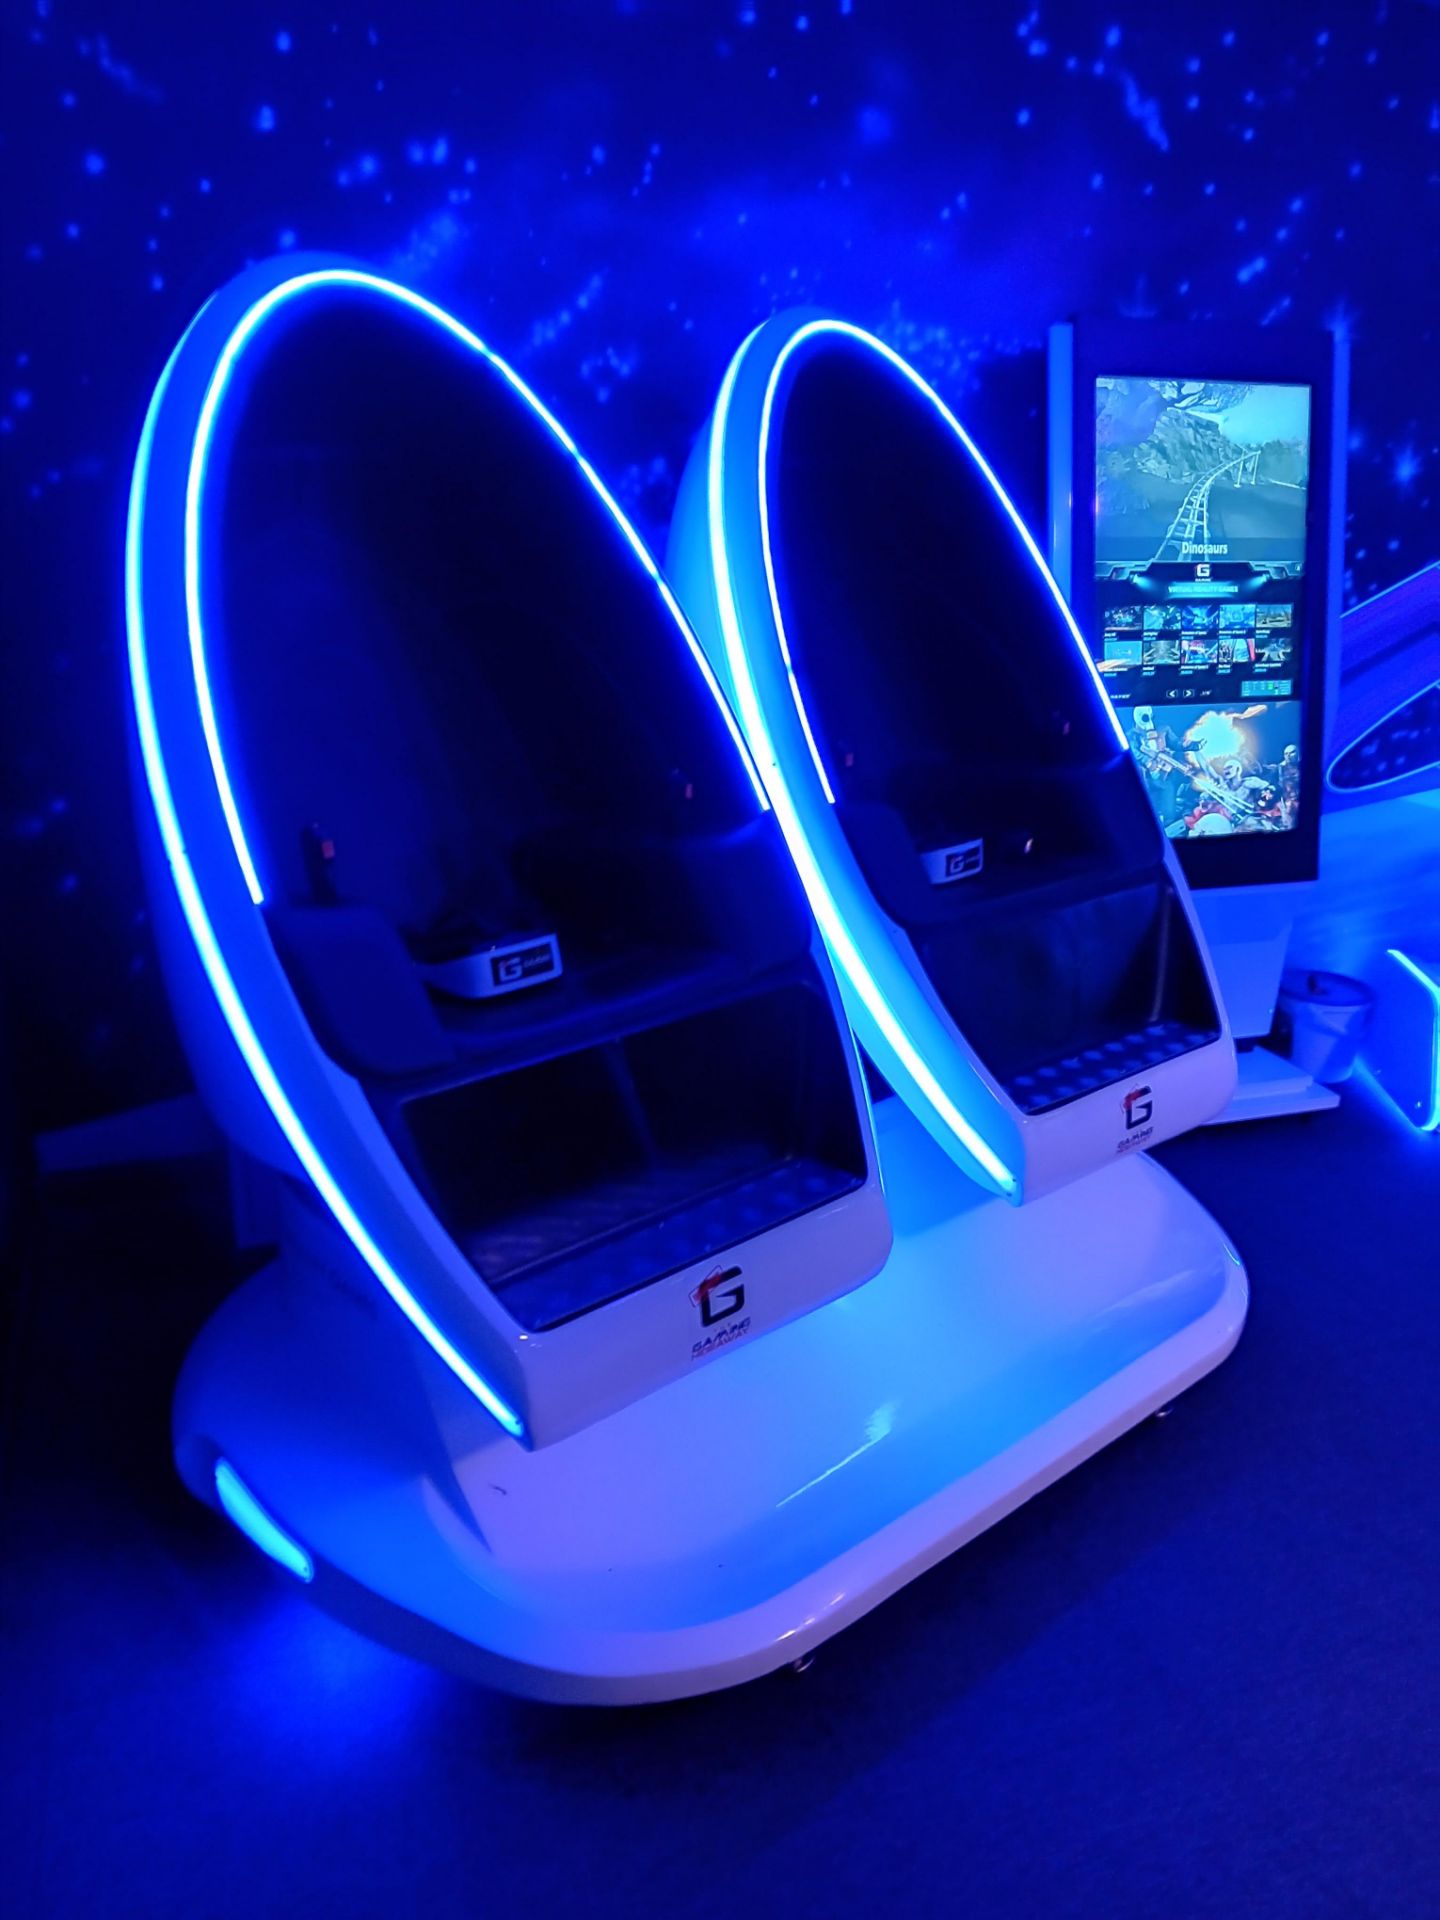 Owatch 2-Person Twin Pod VR Motion Ride Simulator Chair – Cost New £9,600 - Buyer to Disconnect & - Bild 3 aus 4